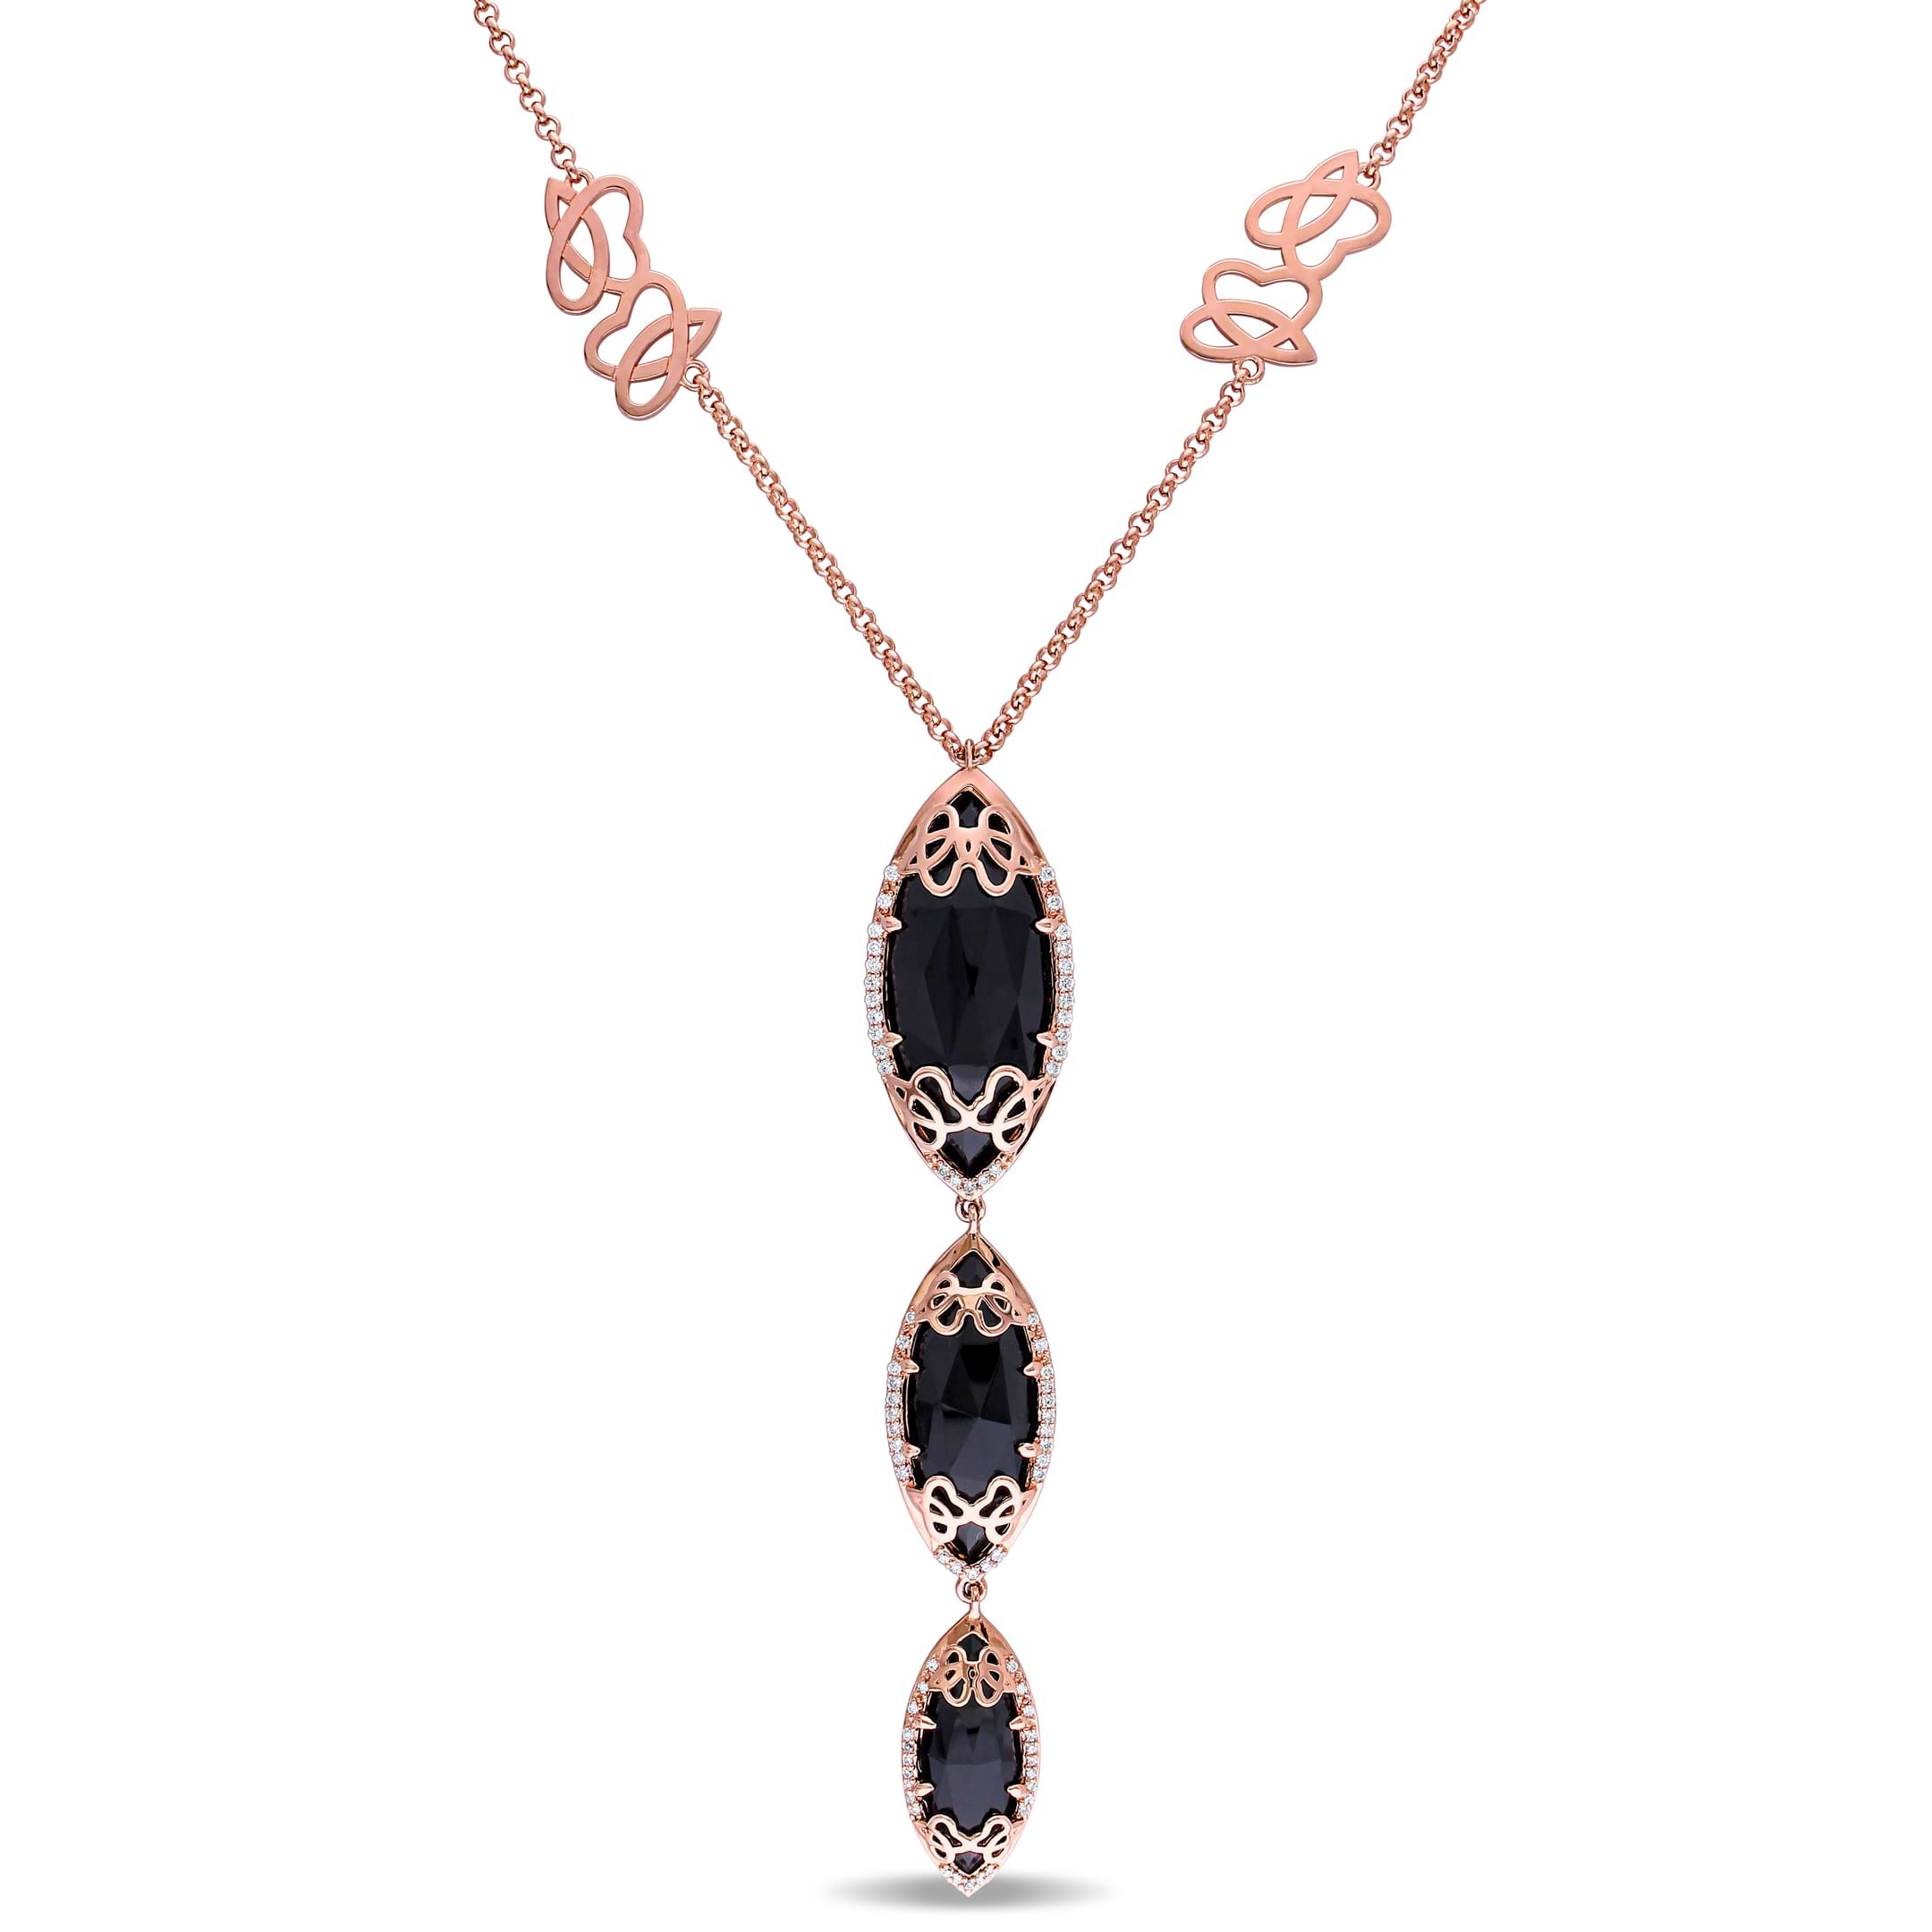 Marquise Black Onyx & Diamond Necklace Pink Sterling Silver (22.05ct)